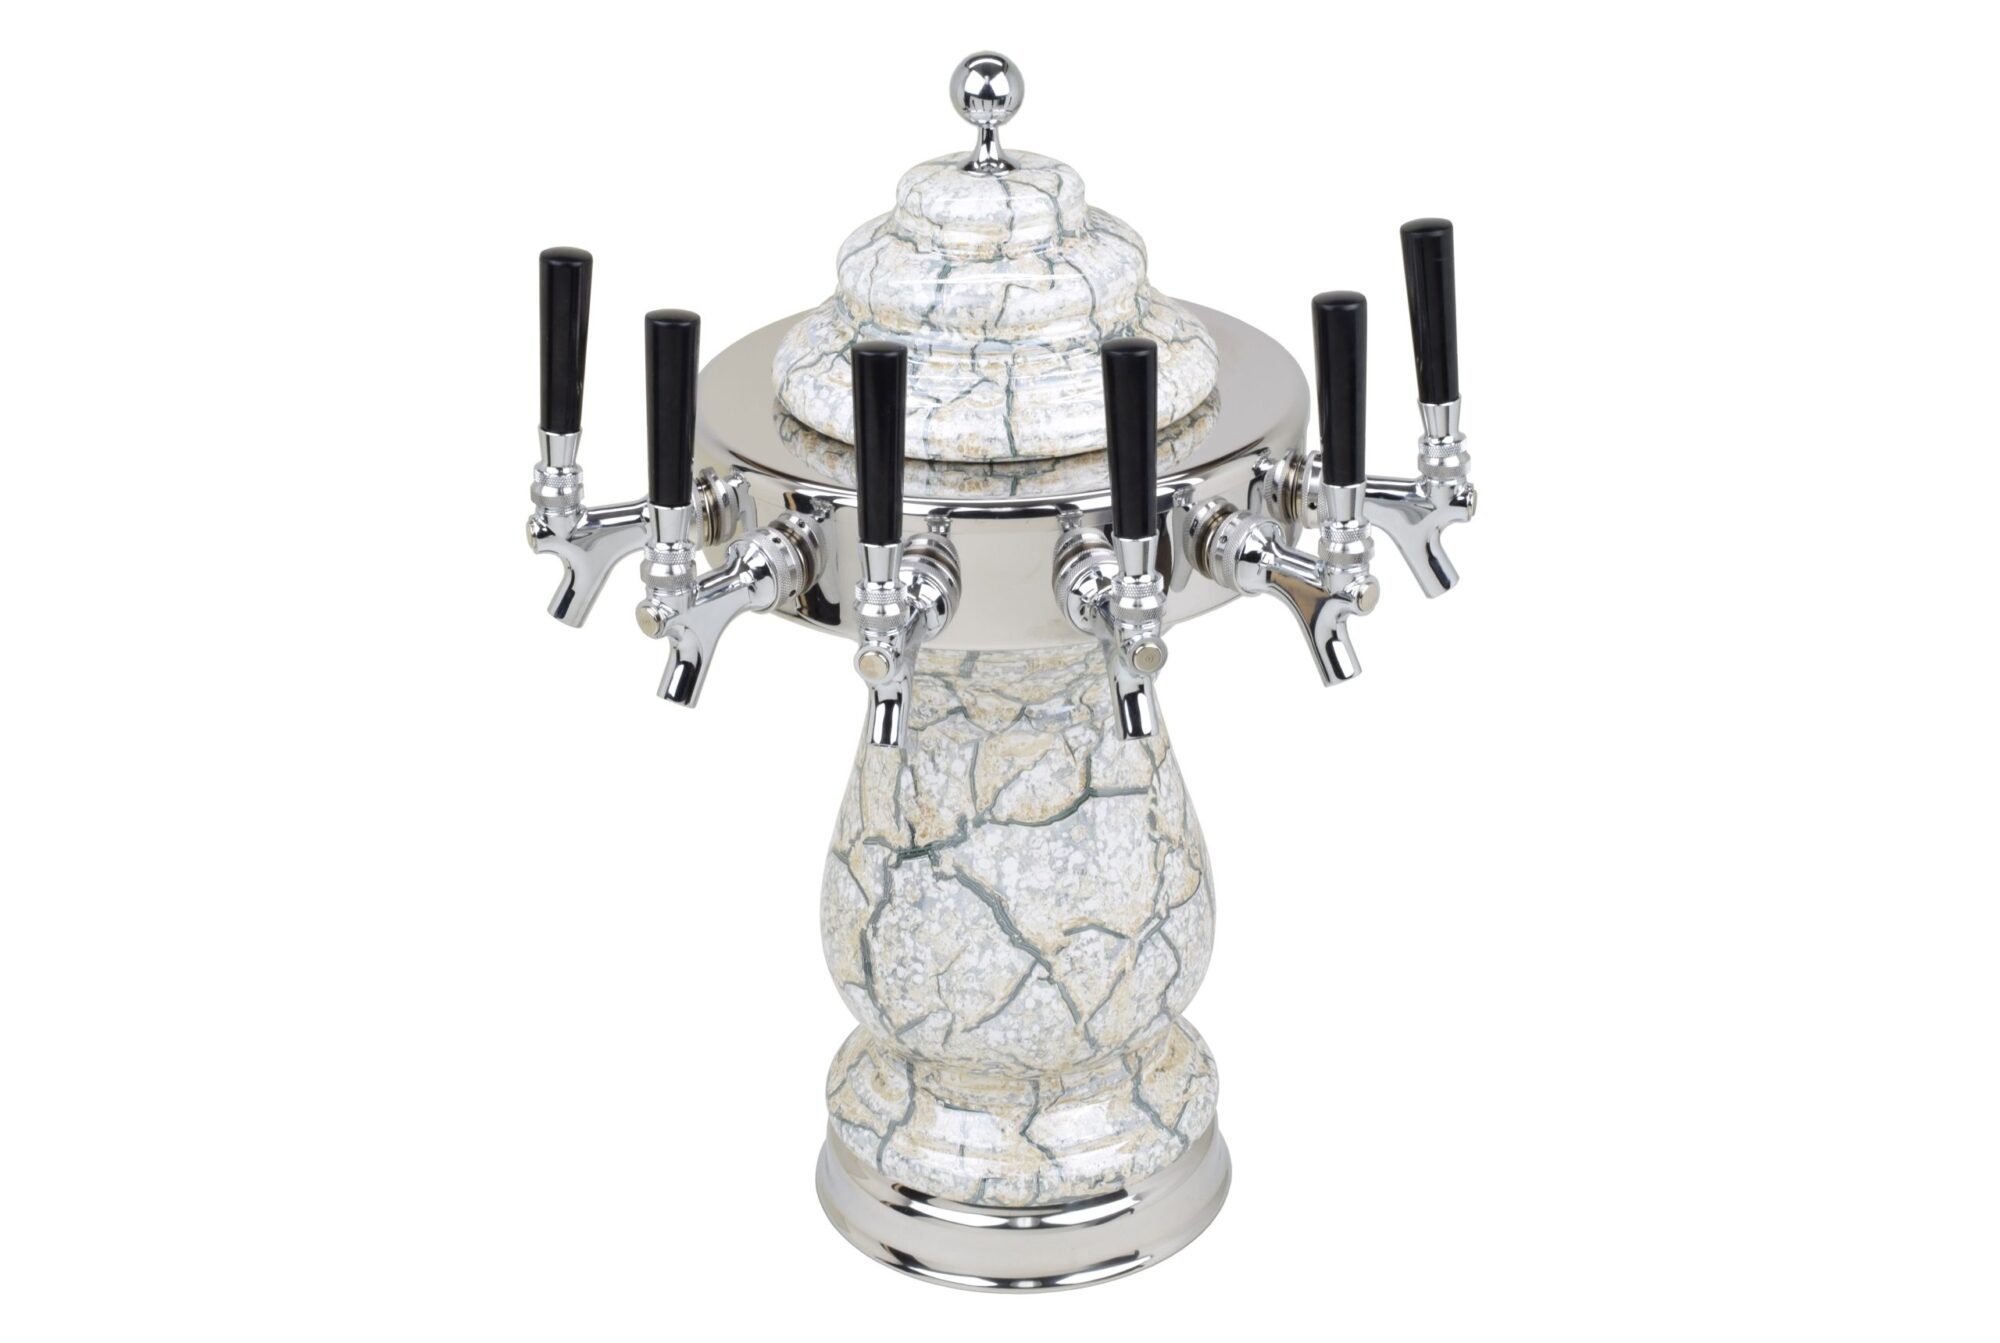 884C-6BeigeMarble Six Faucet Ceramic Tower with Chrome Hardware and Faucets - Shown in Beige Marble